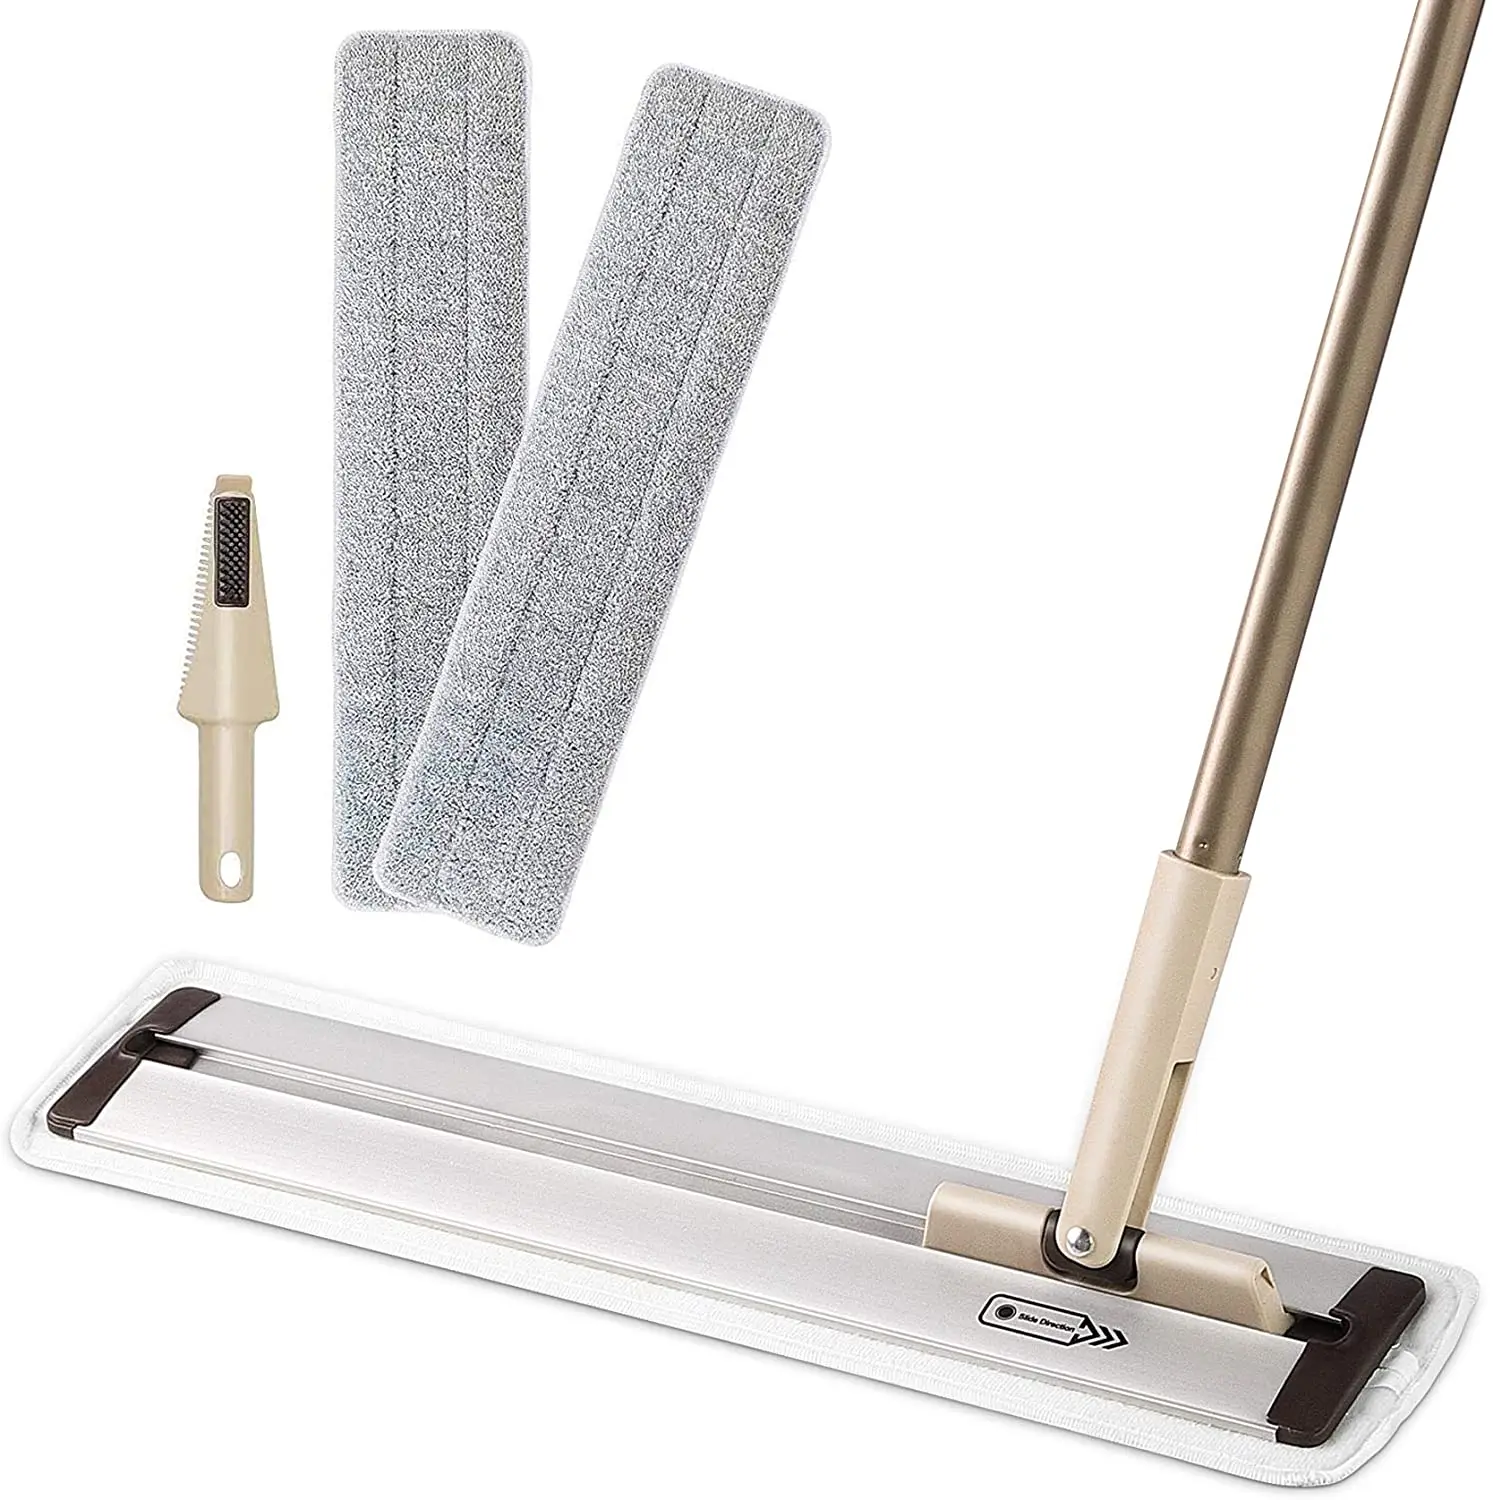 

Yocada Aluminum Head Flat Mops Microfiber Mop Designed for Bed Bottom Sofa Bottom and Hard-to-Reach Corners Cleaning